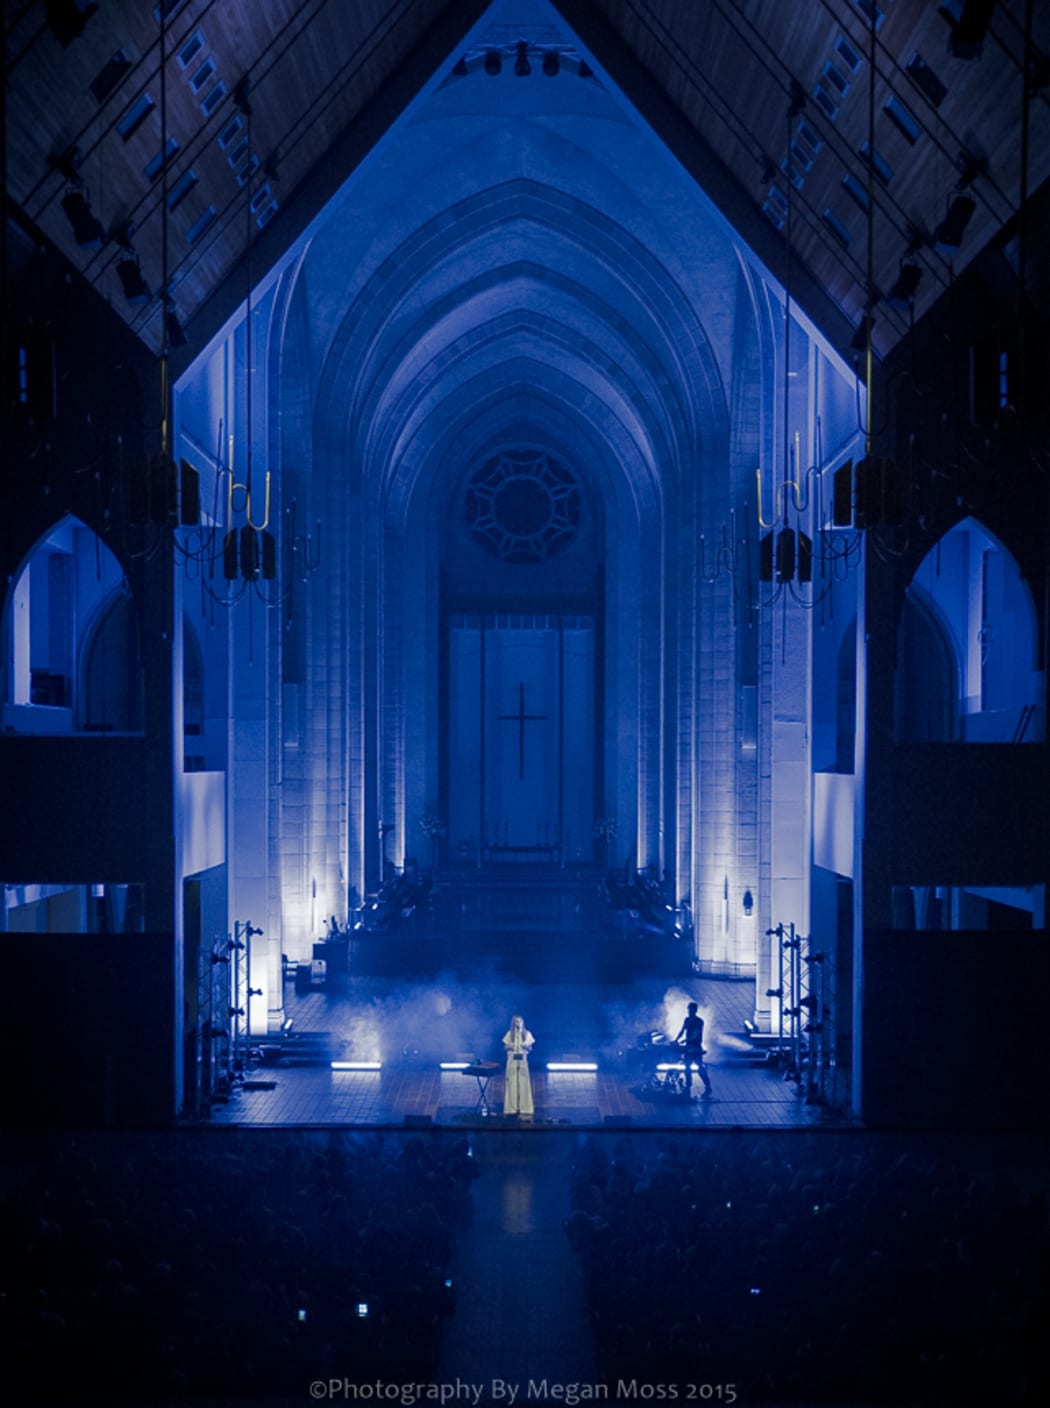 Brooke Fraser, June 15 2015, at Holy Trinity Cathedral